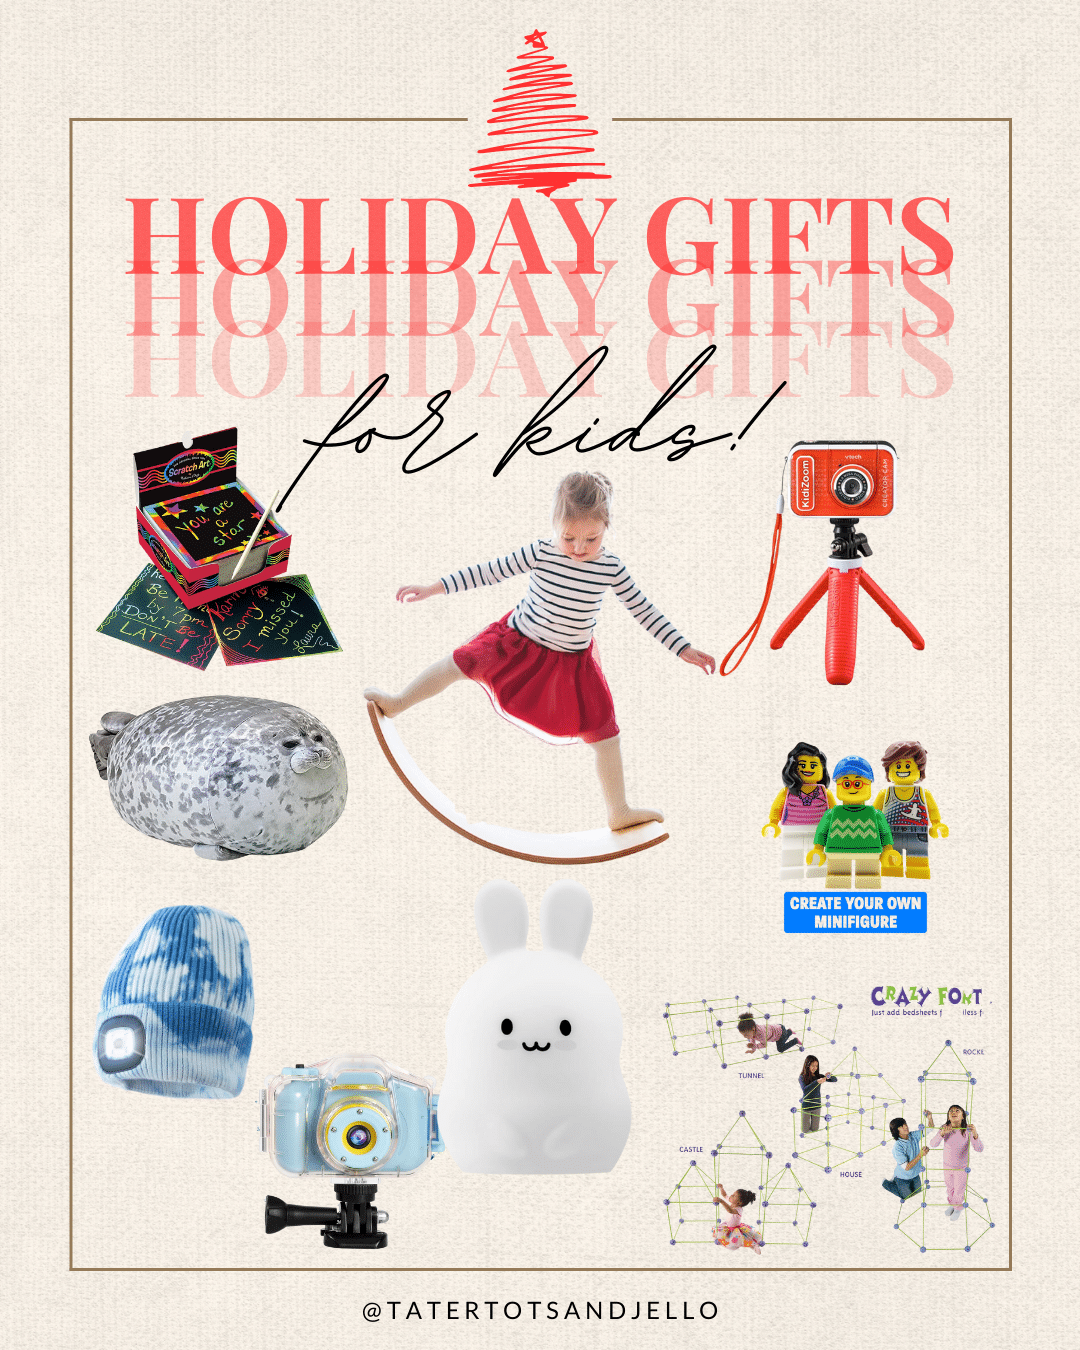 Christmas Gift Ideas for Everyone! Embark on a festive journey with gift ideas for everyone on your list, from personalized treasures to creative DIY delights.